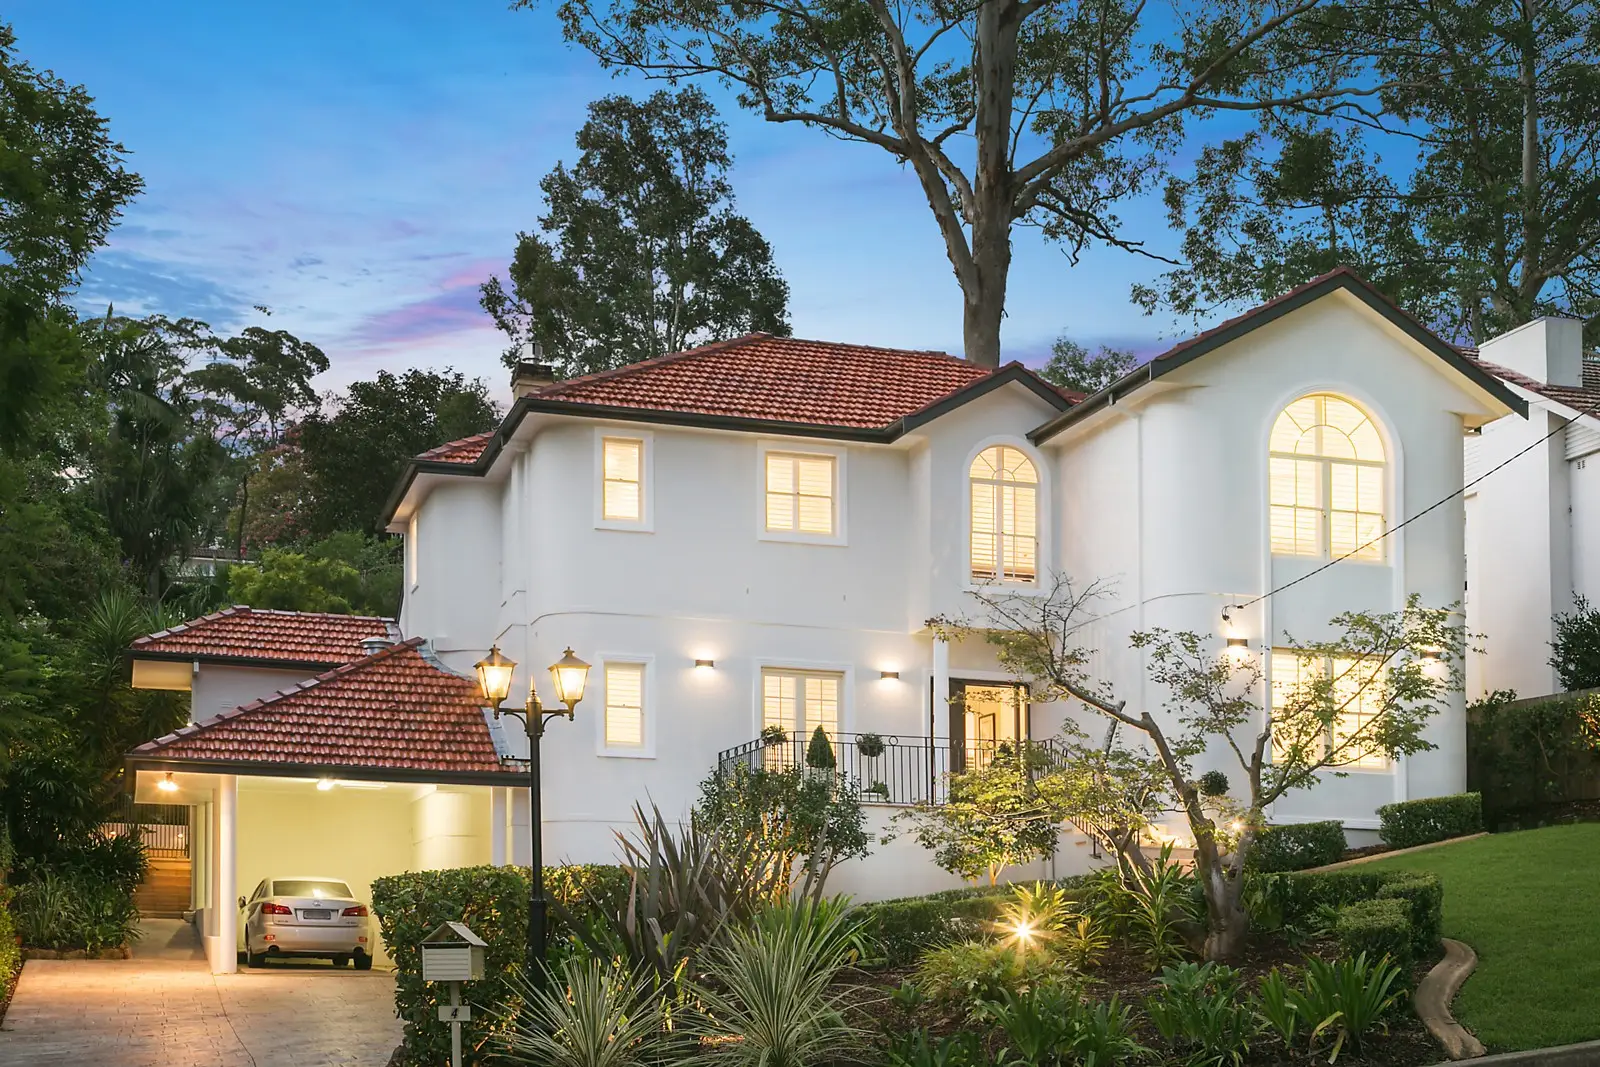 Photo #3: 4 Allawah Road, Pymble - Sold by Sydney Sotheby's International Realty